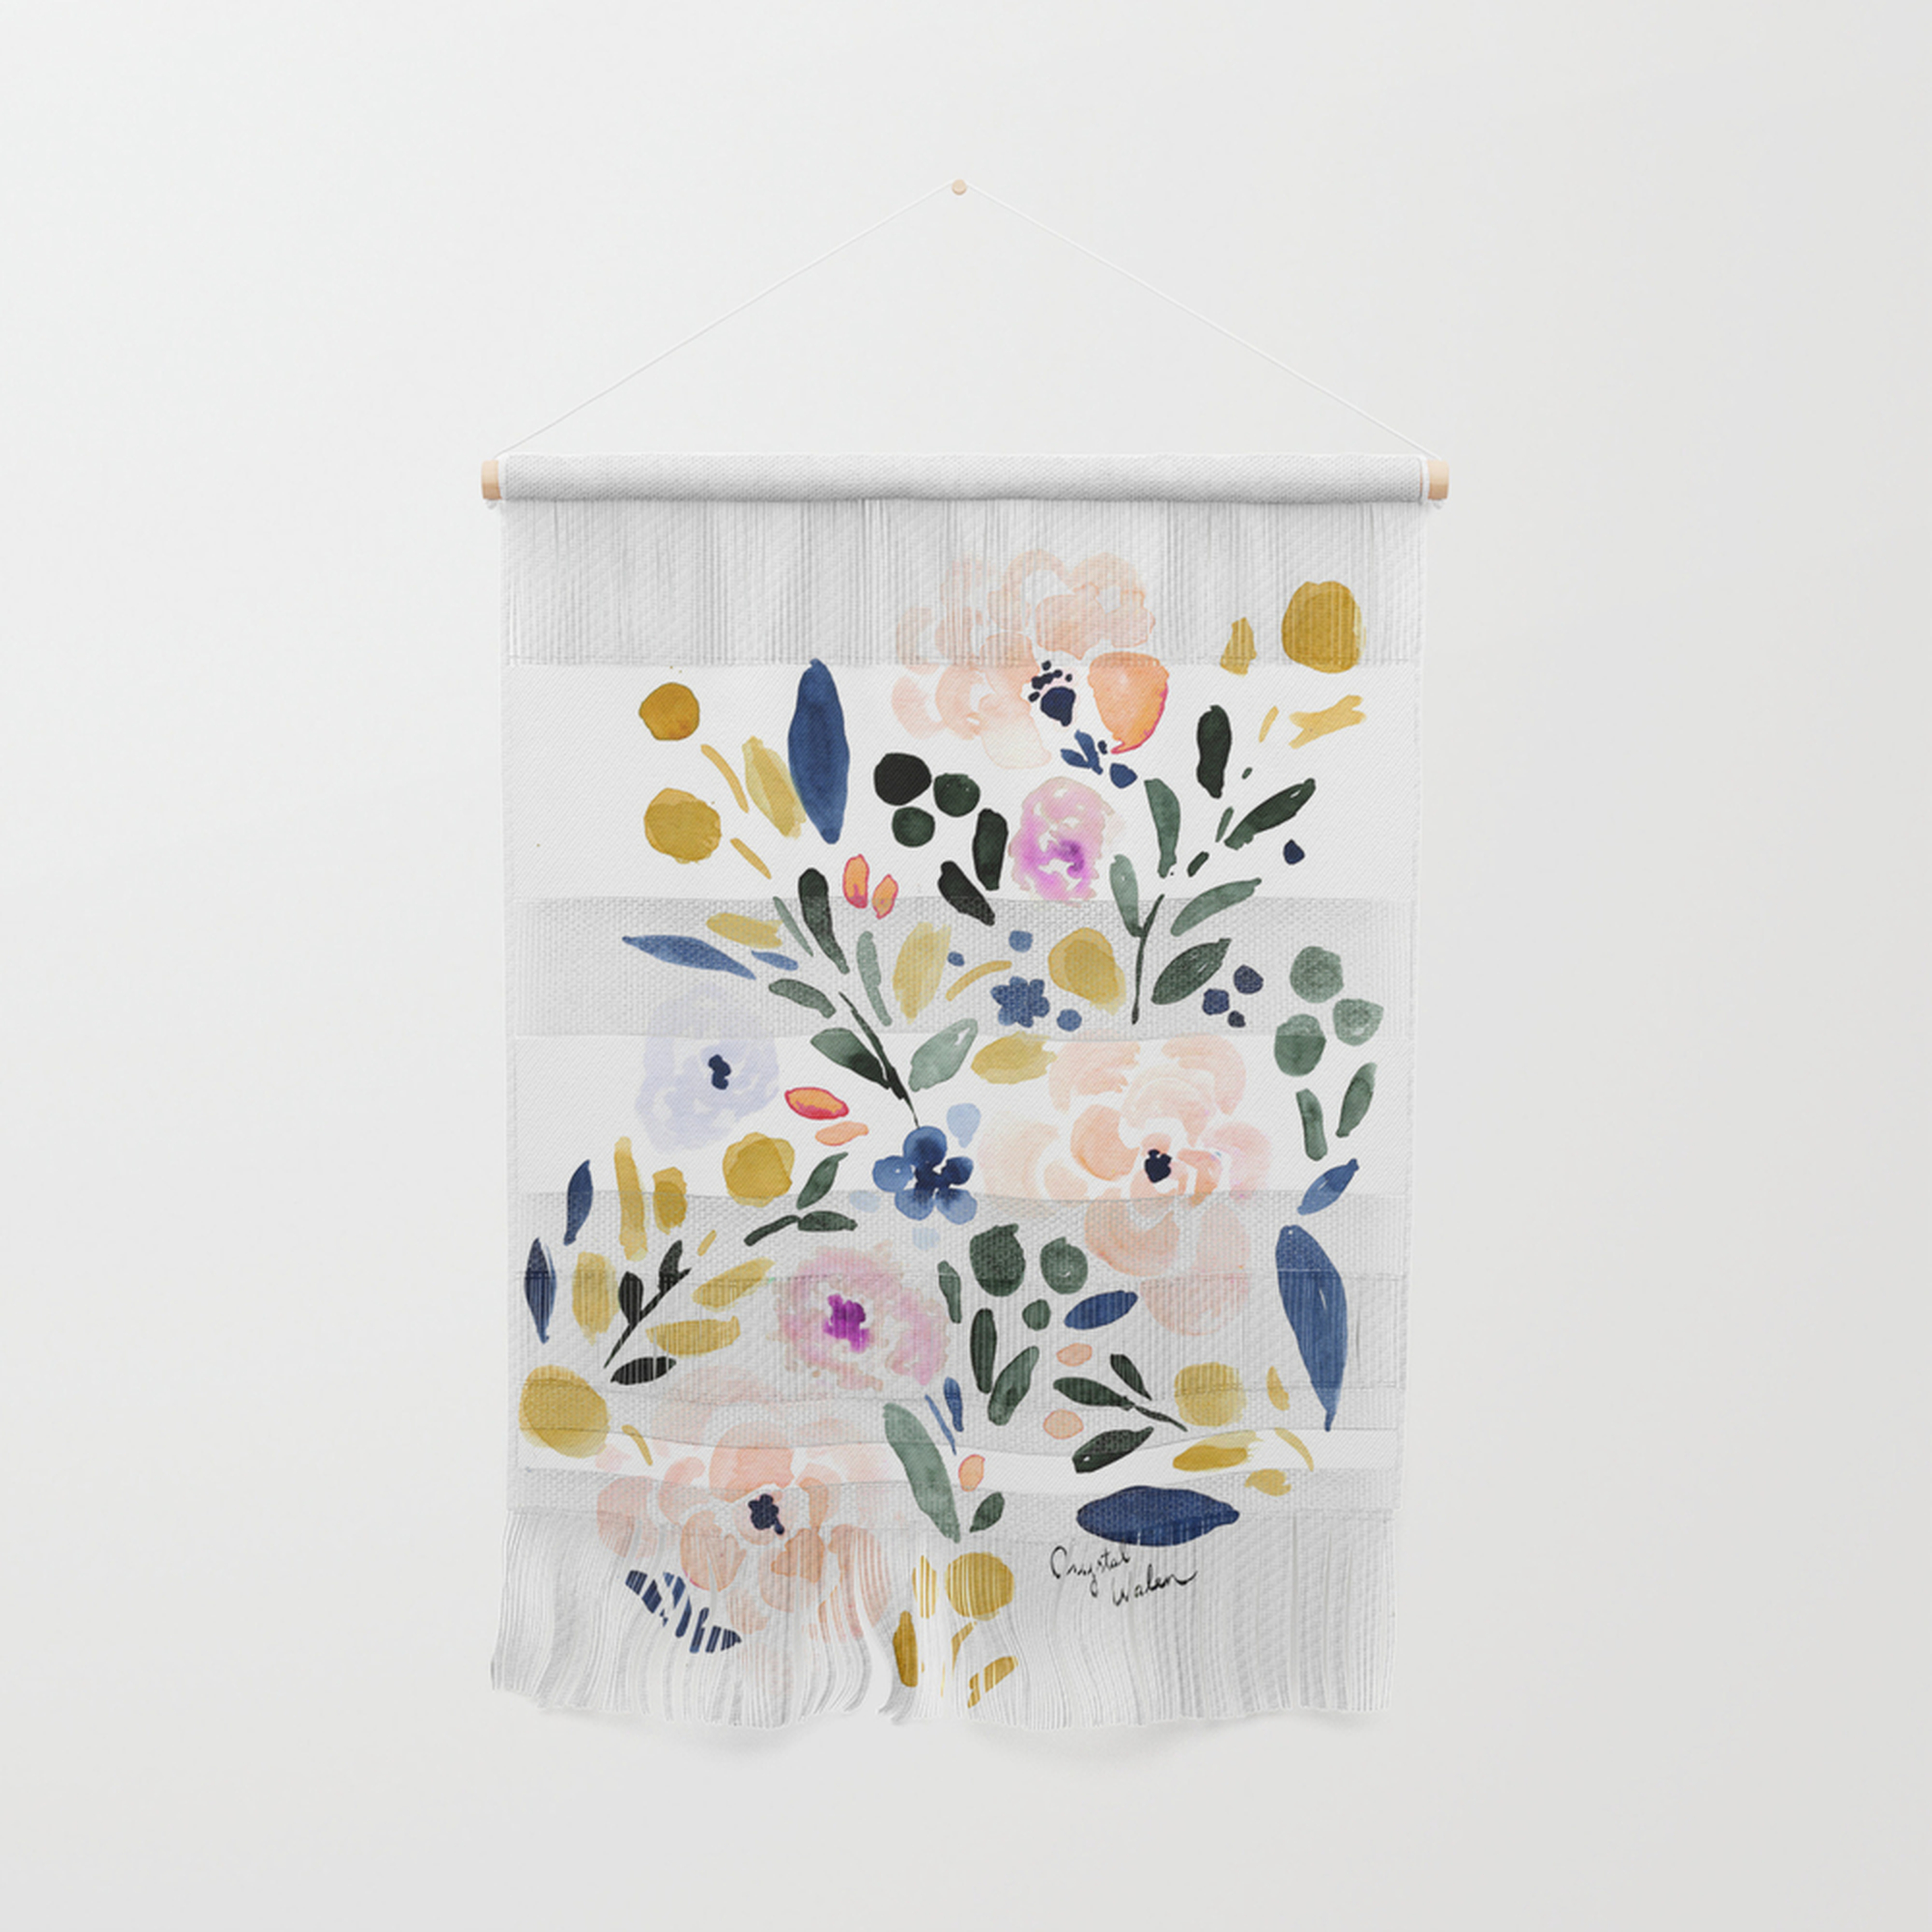 Sierra Floral Wall Hanging by Crystal W Design - Small 11.25" x 15.5" - Society6